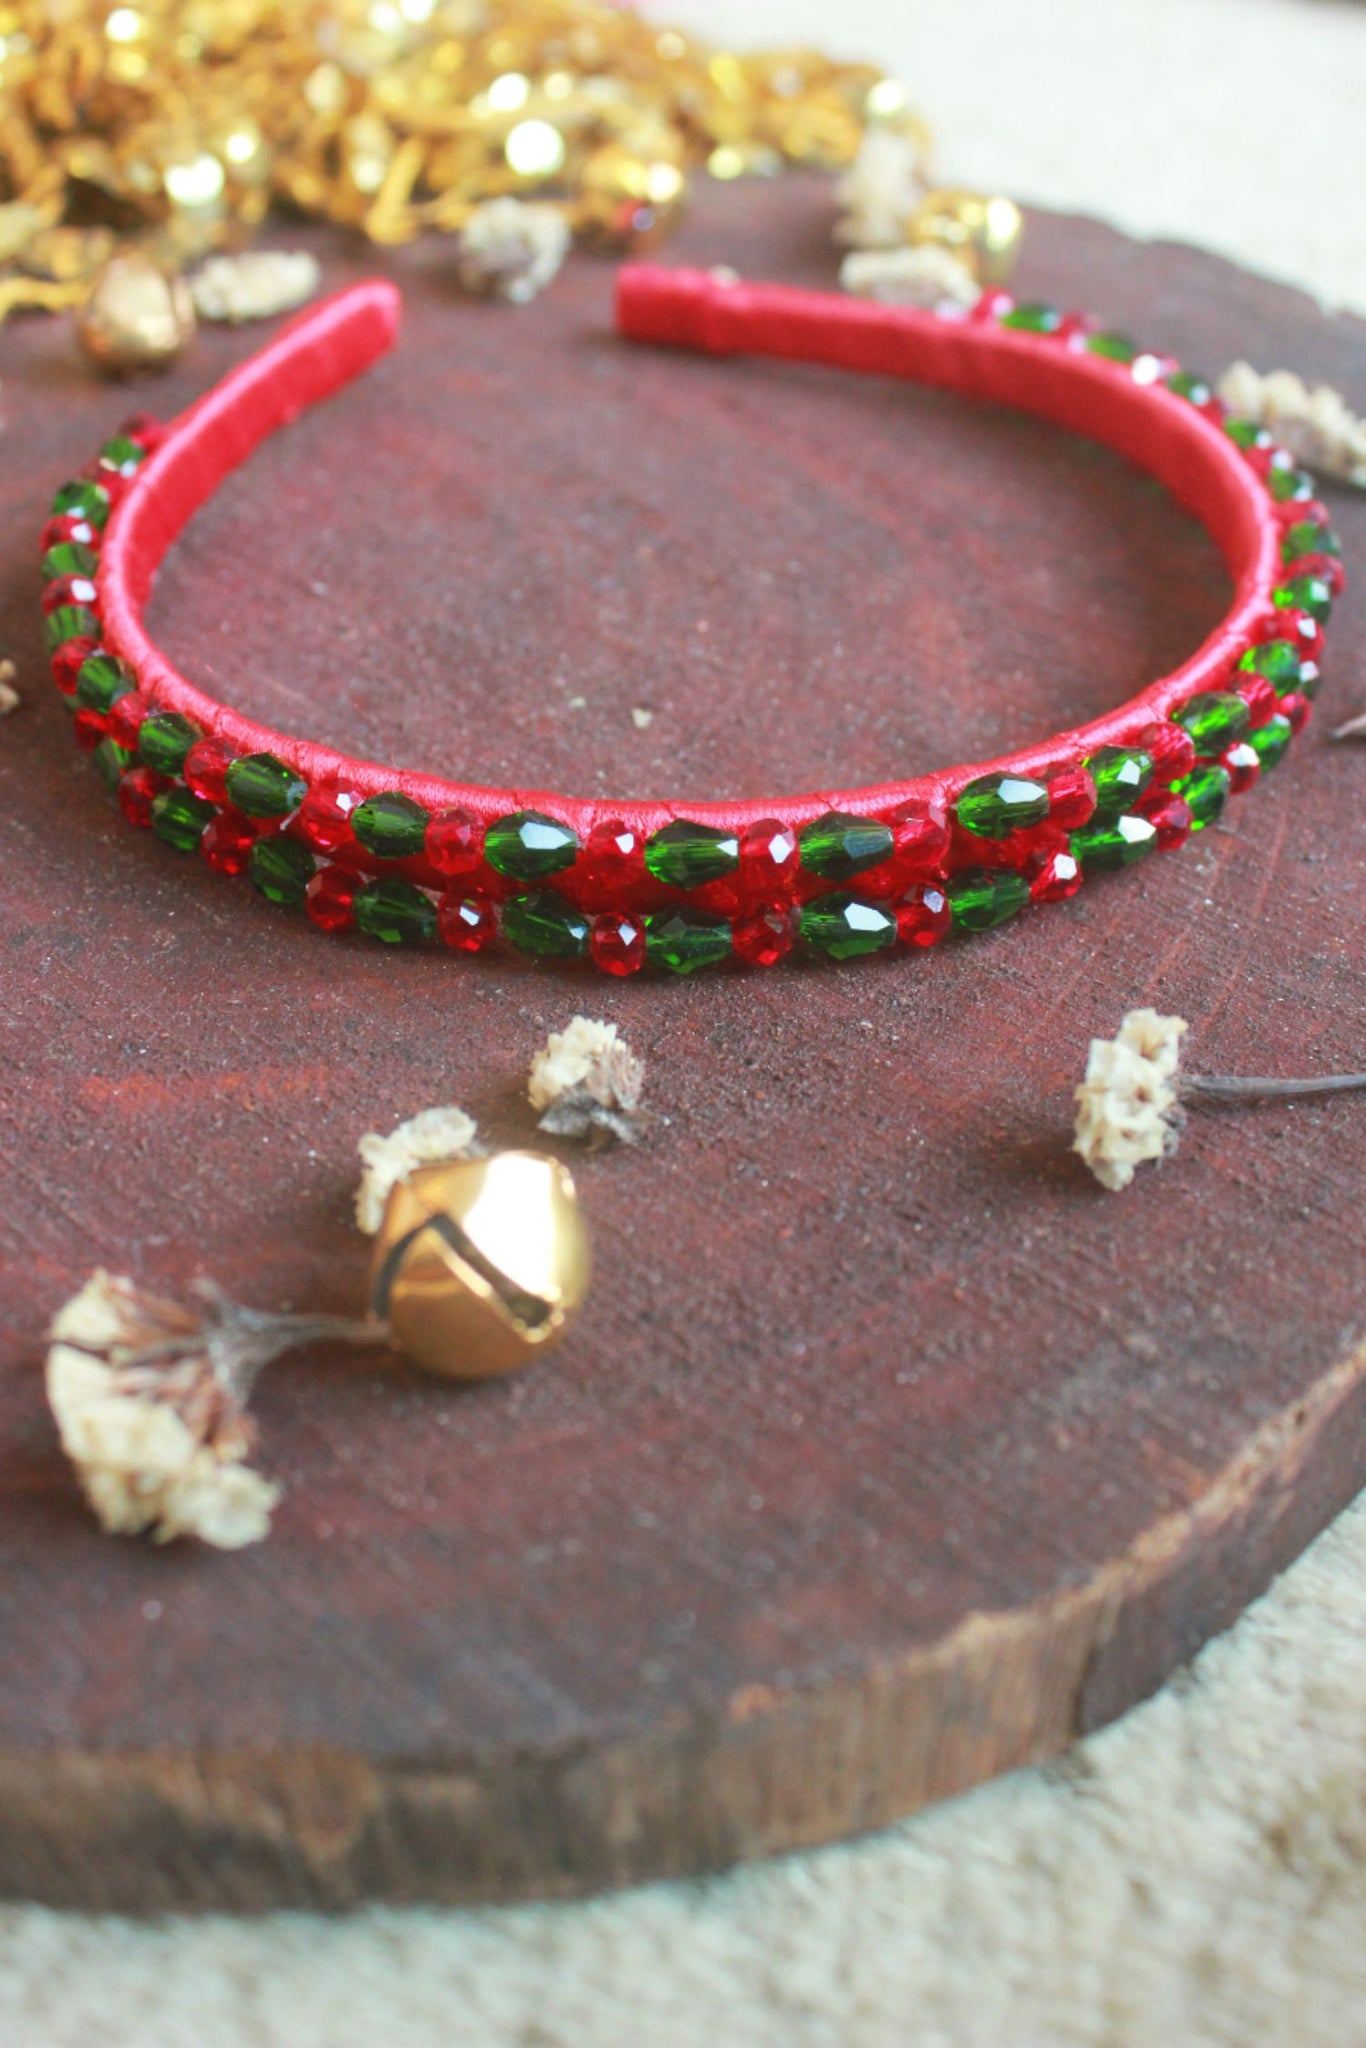 Choko Reindeer's Pearls Embellished Christmas Hairband Red And Green